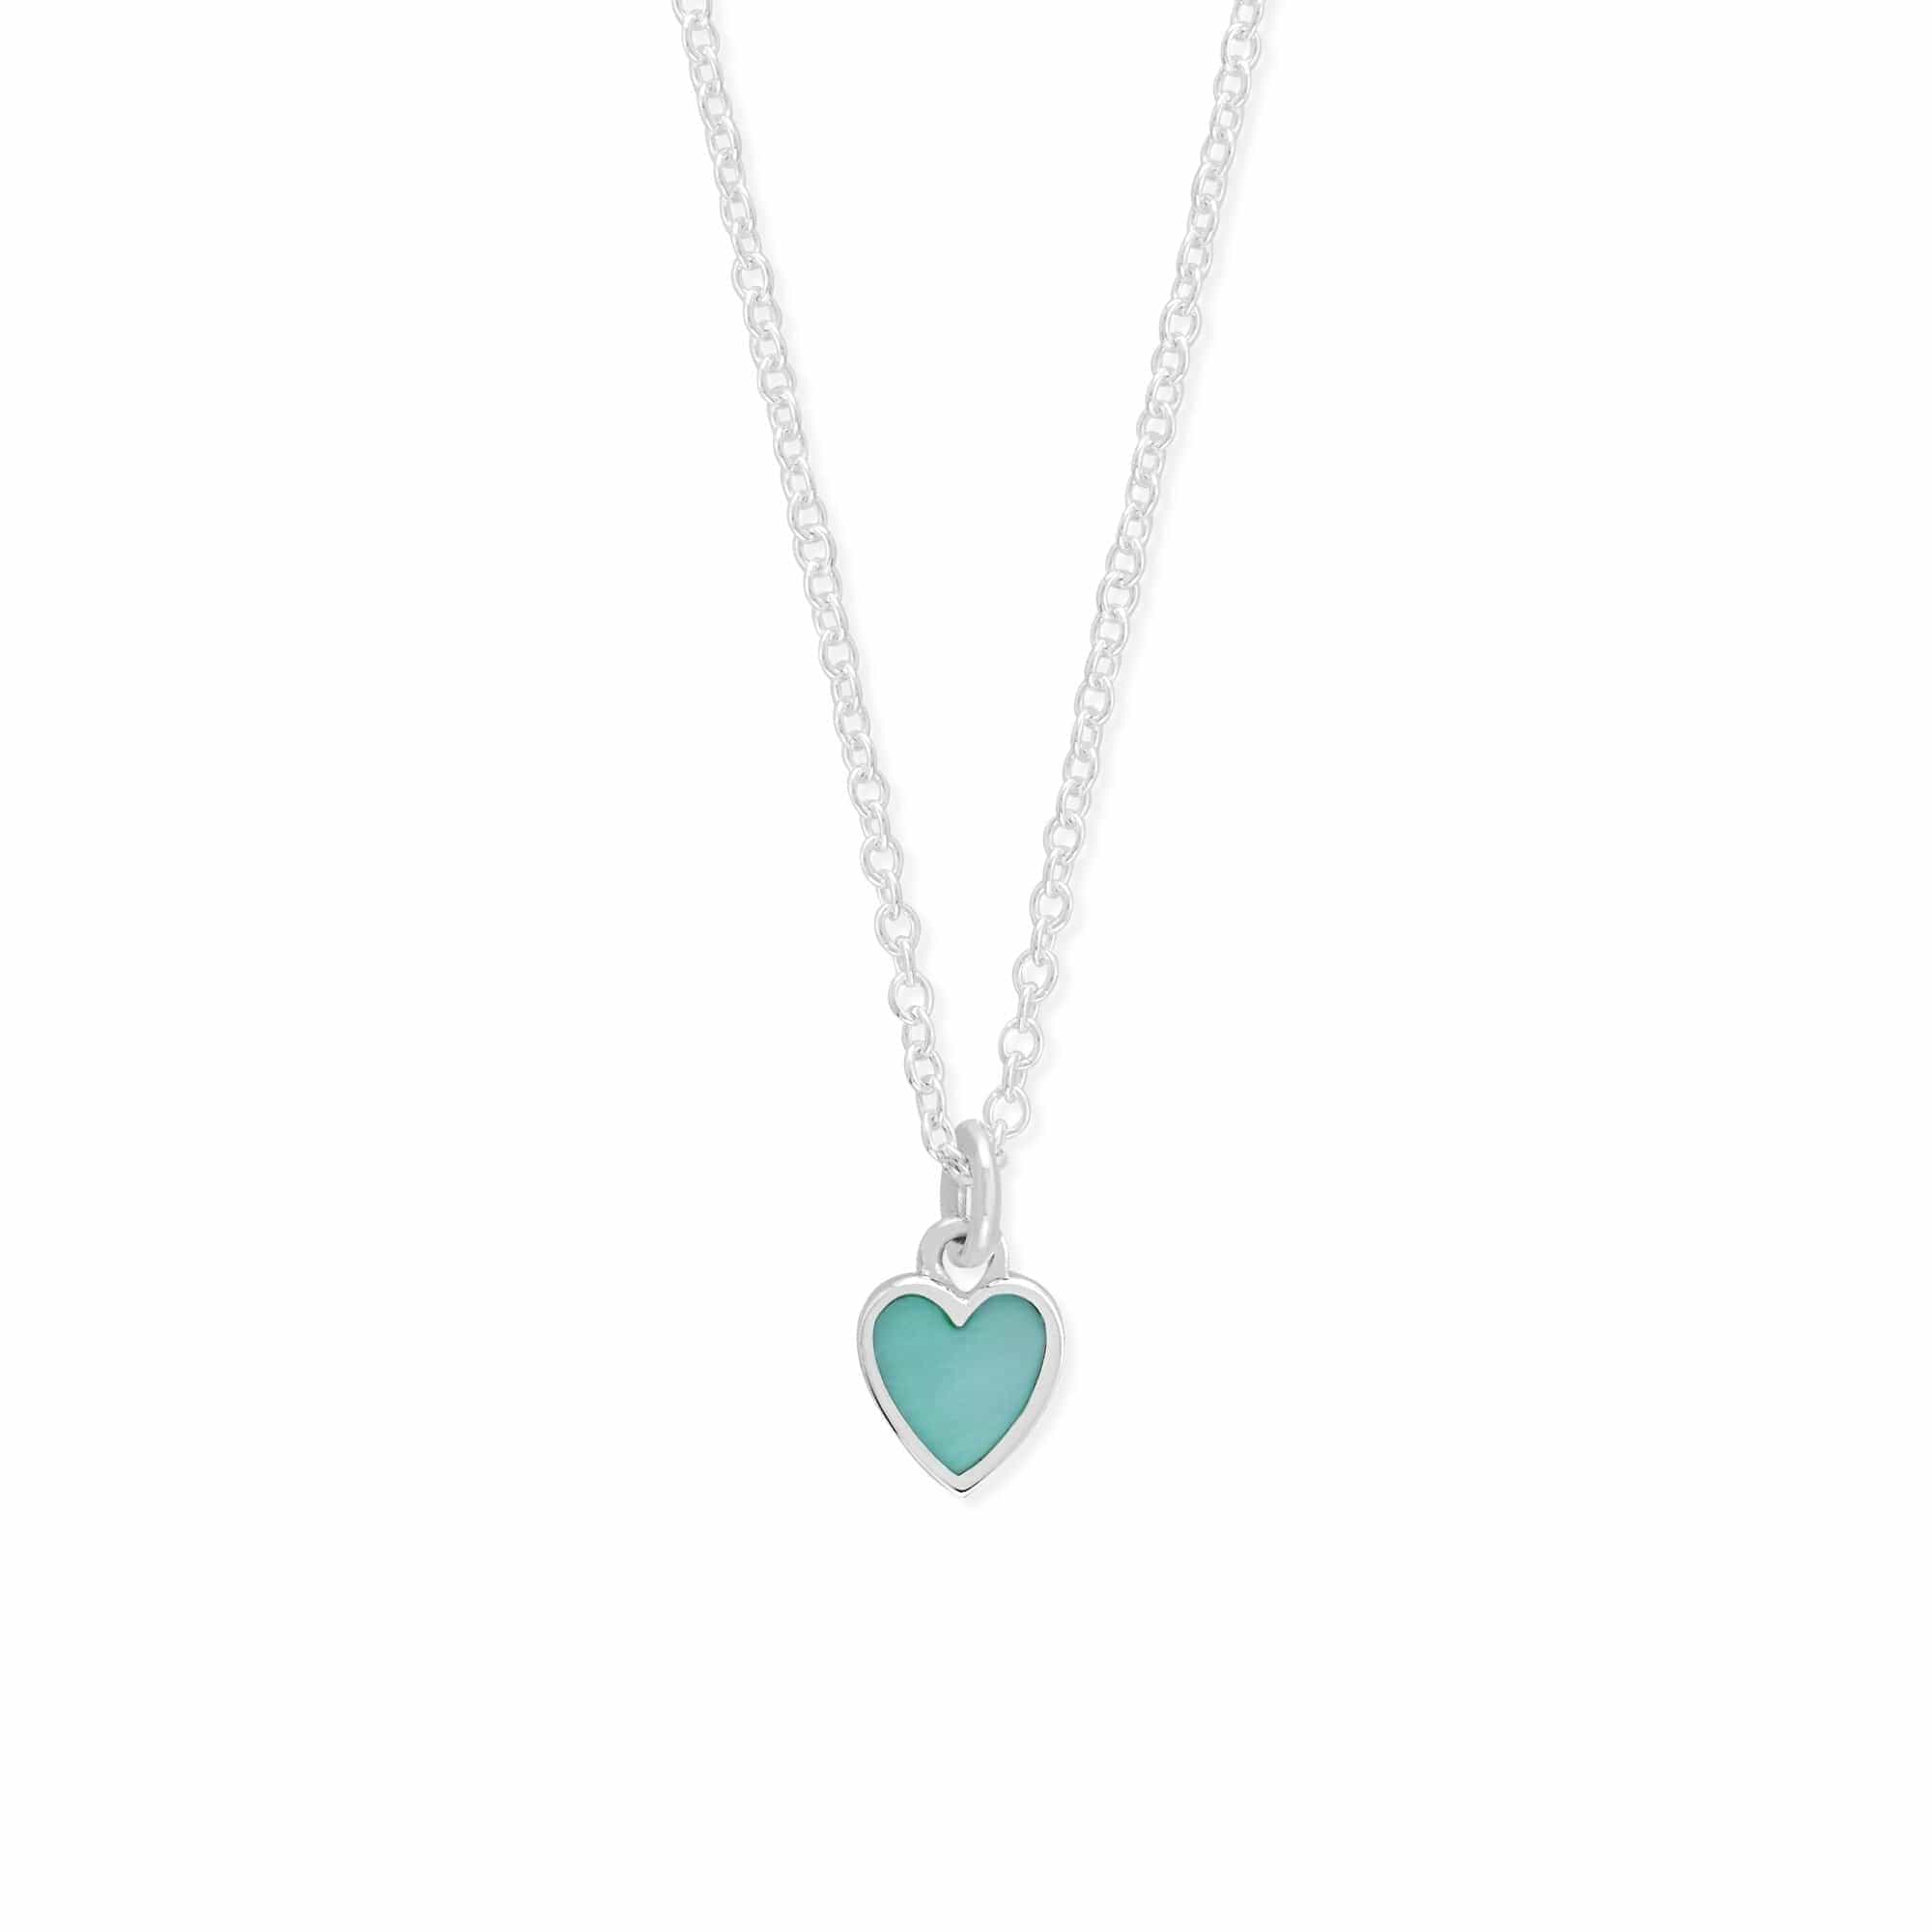 Boma Jewelry Necklaces Belle Heart Necklace with Stone